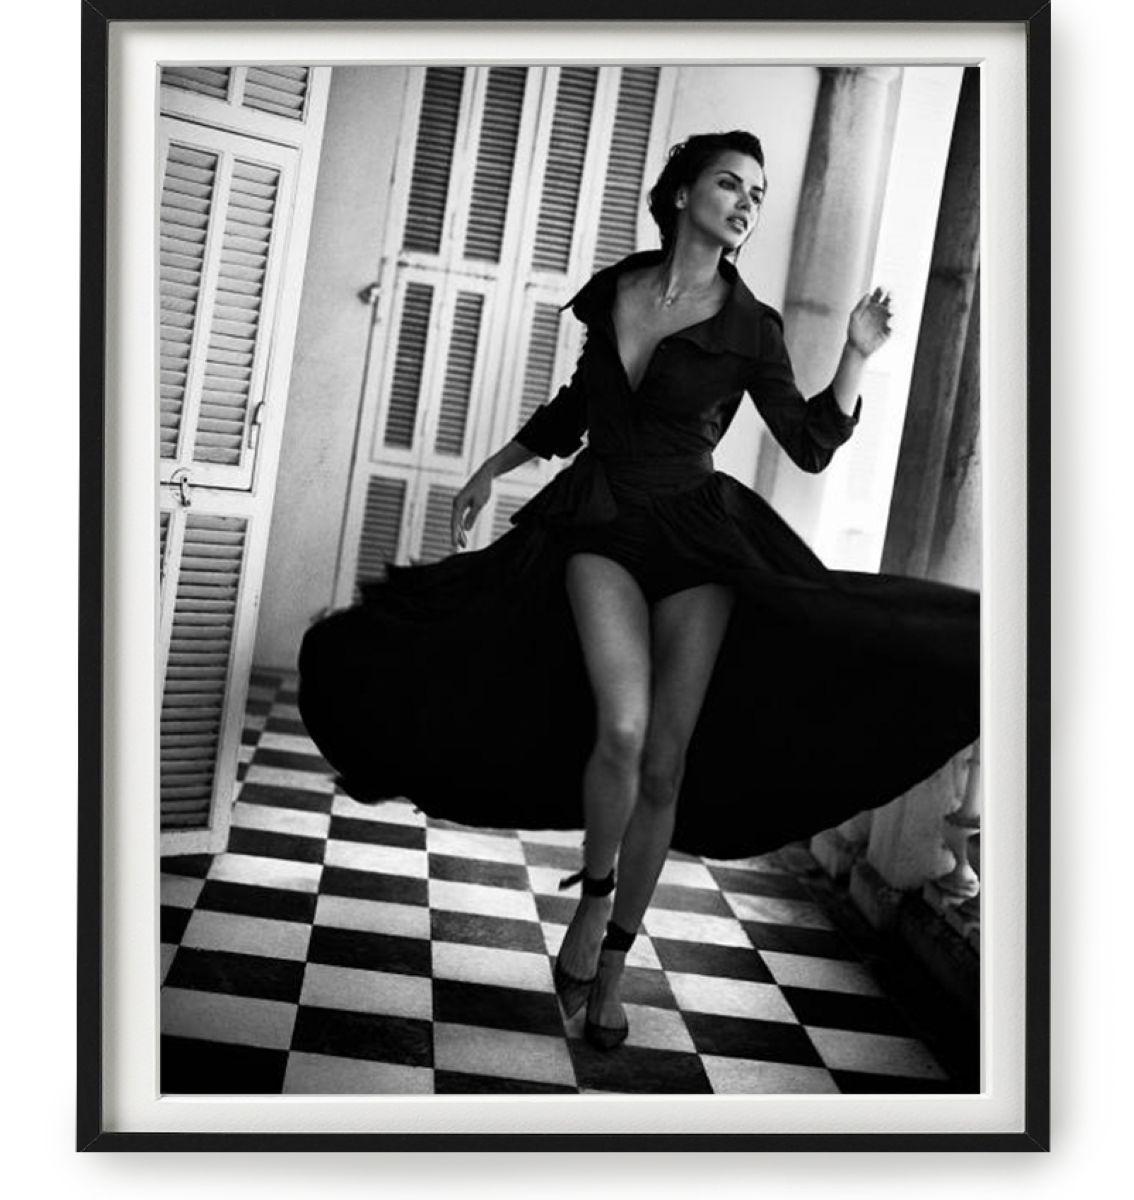 Vincent Peters Portrait Photograph - Adriana Lima, Menton, 2017 - the Supermodel in a black dress running 